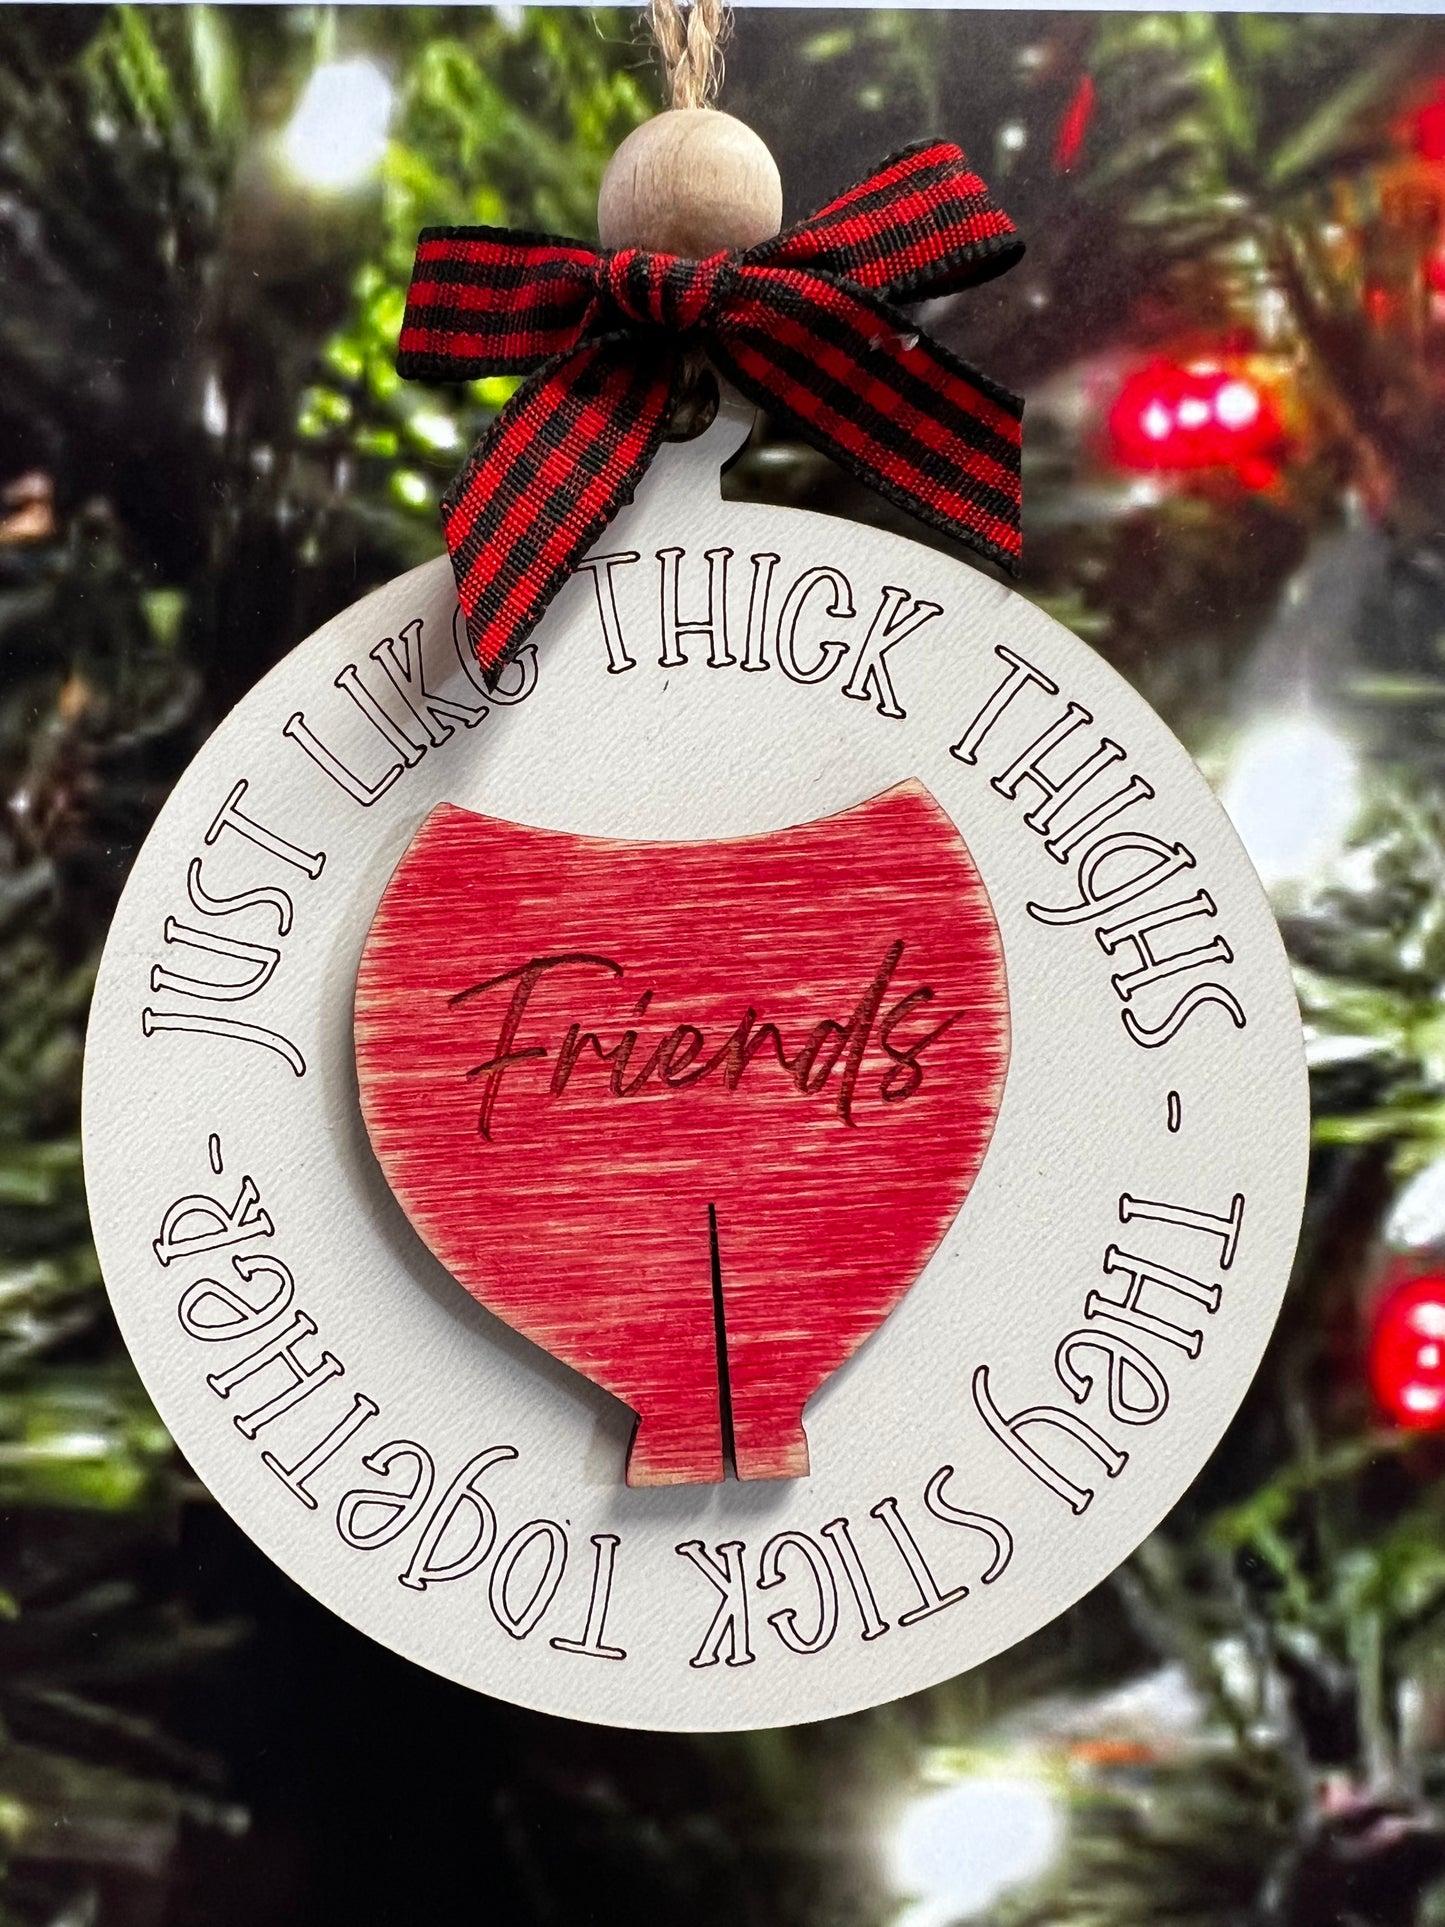 Ornament, Just like thick thighs…